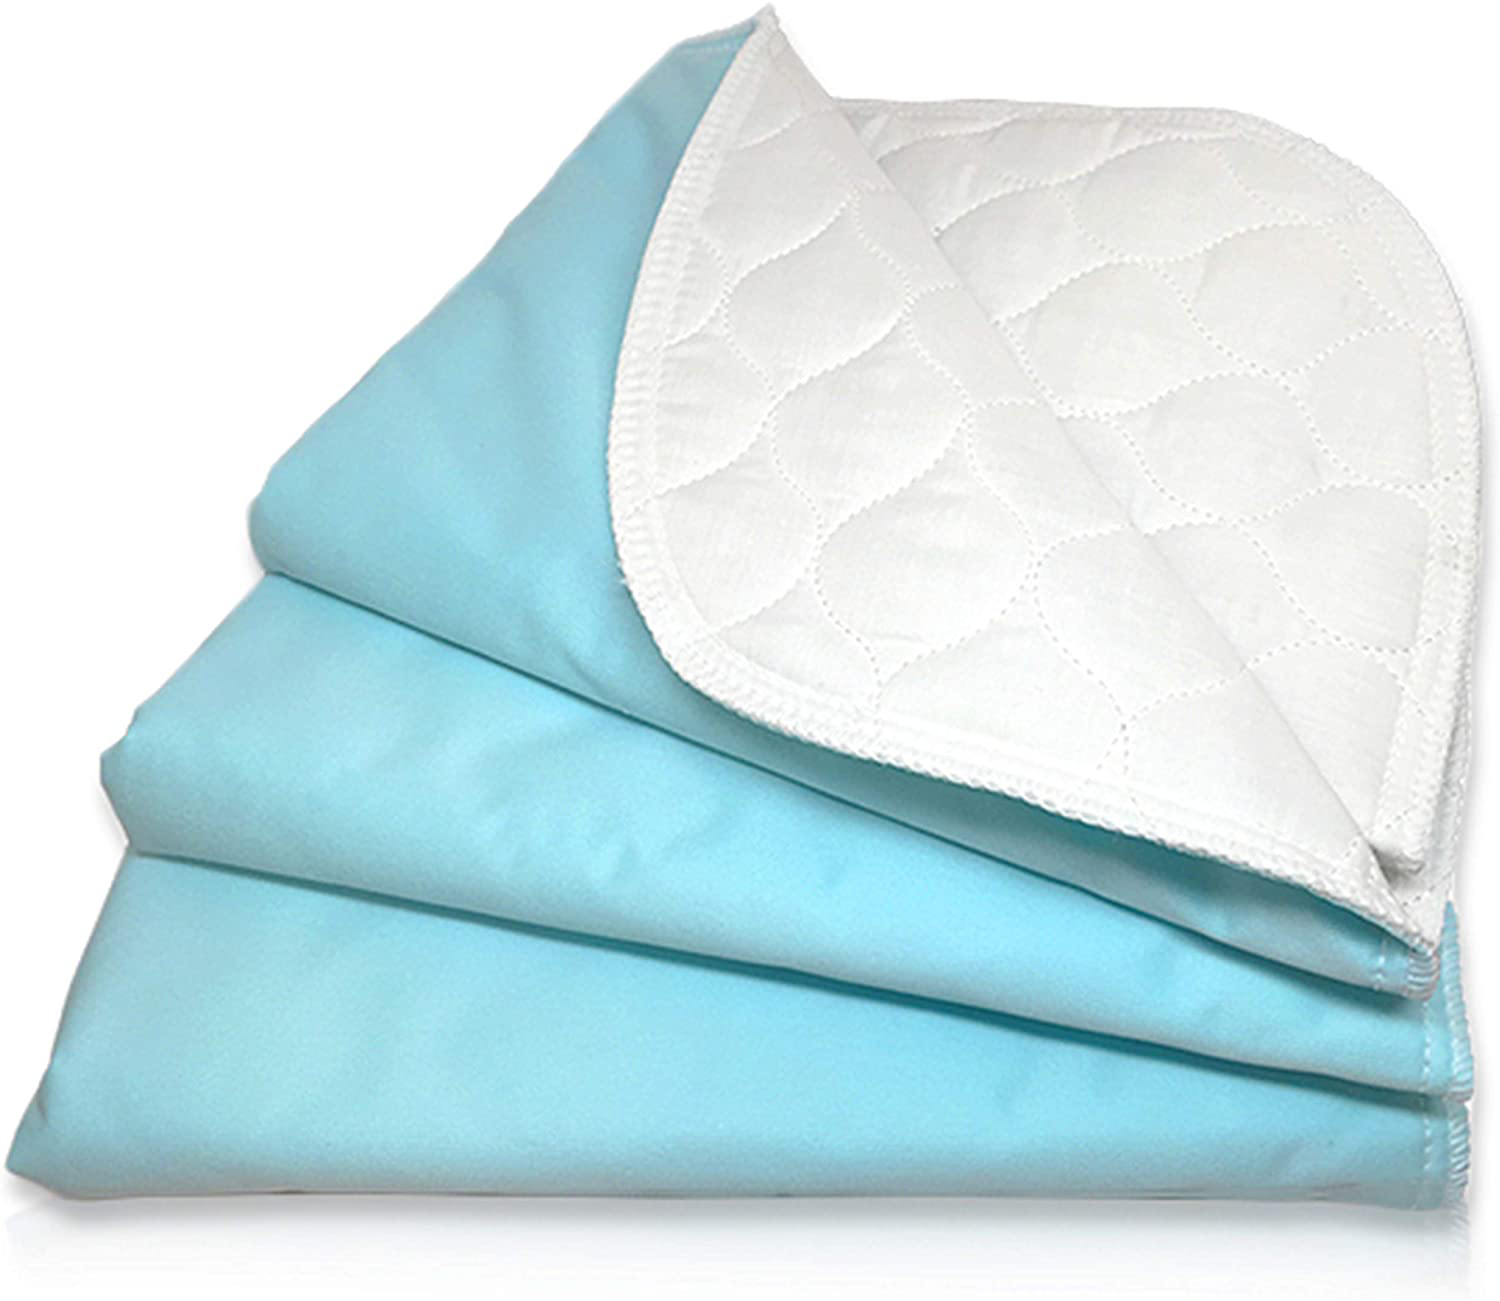 RMS Ultra Soft 4-Layer Washable and Reusable Incontinence Bed Pad - Waterproof Bed Pads, 18"X24" (3 Pack)